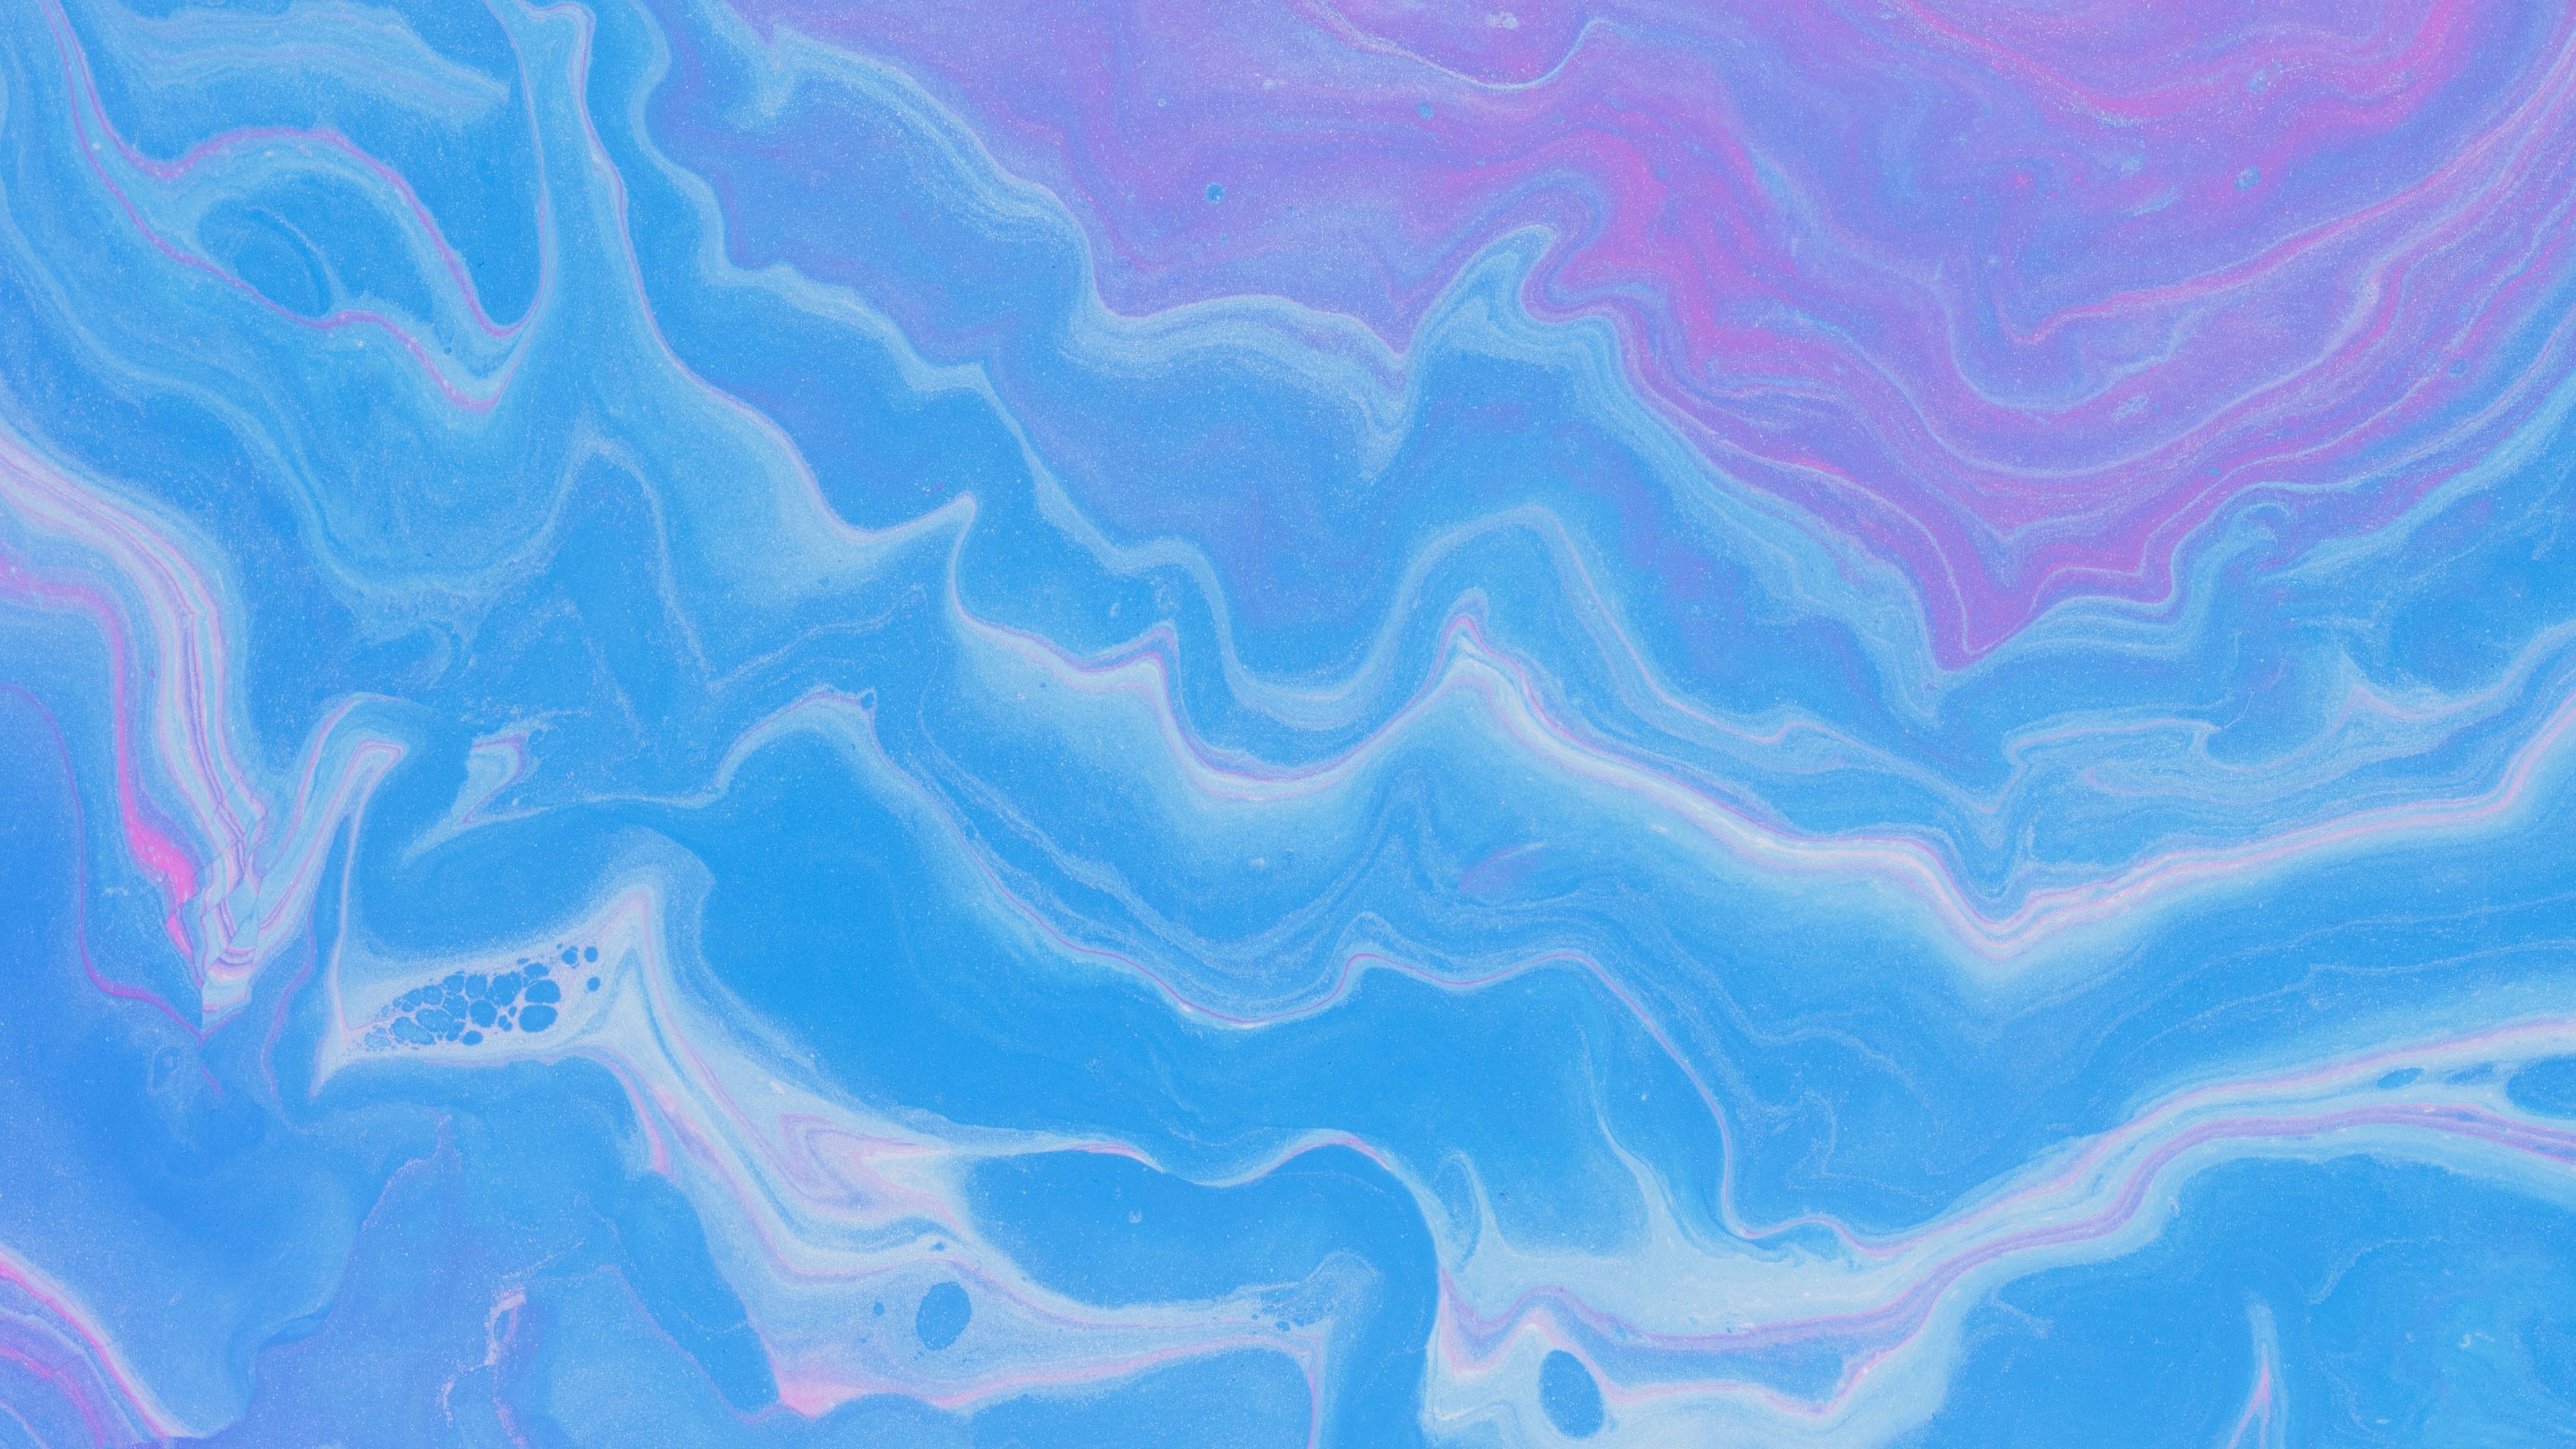 Download wallpaper 3840x2160 stains, liquid, texture, blue, purple, abstraction 4k uhd 16:9 HD background